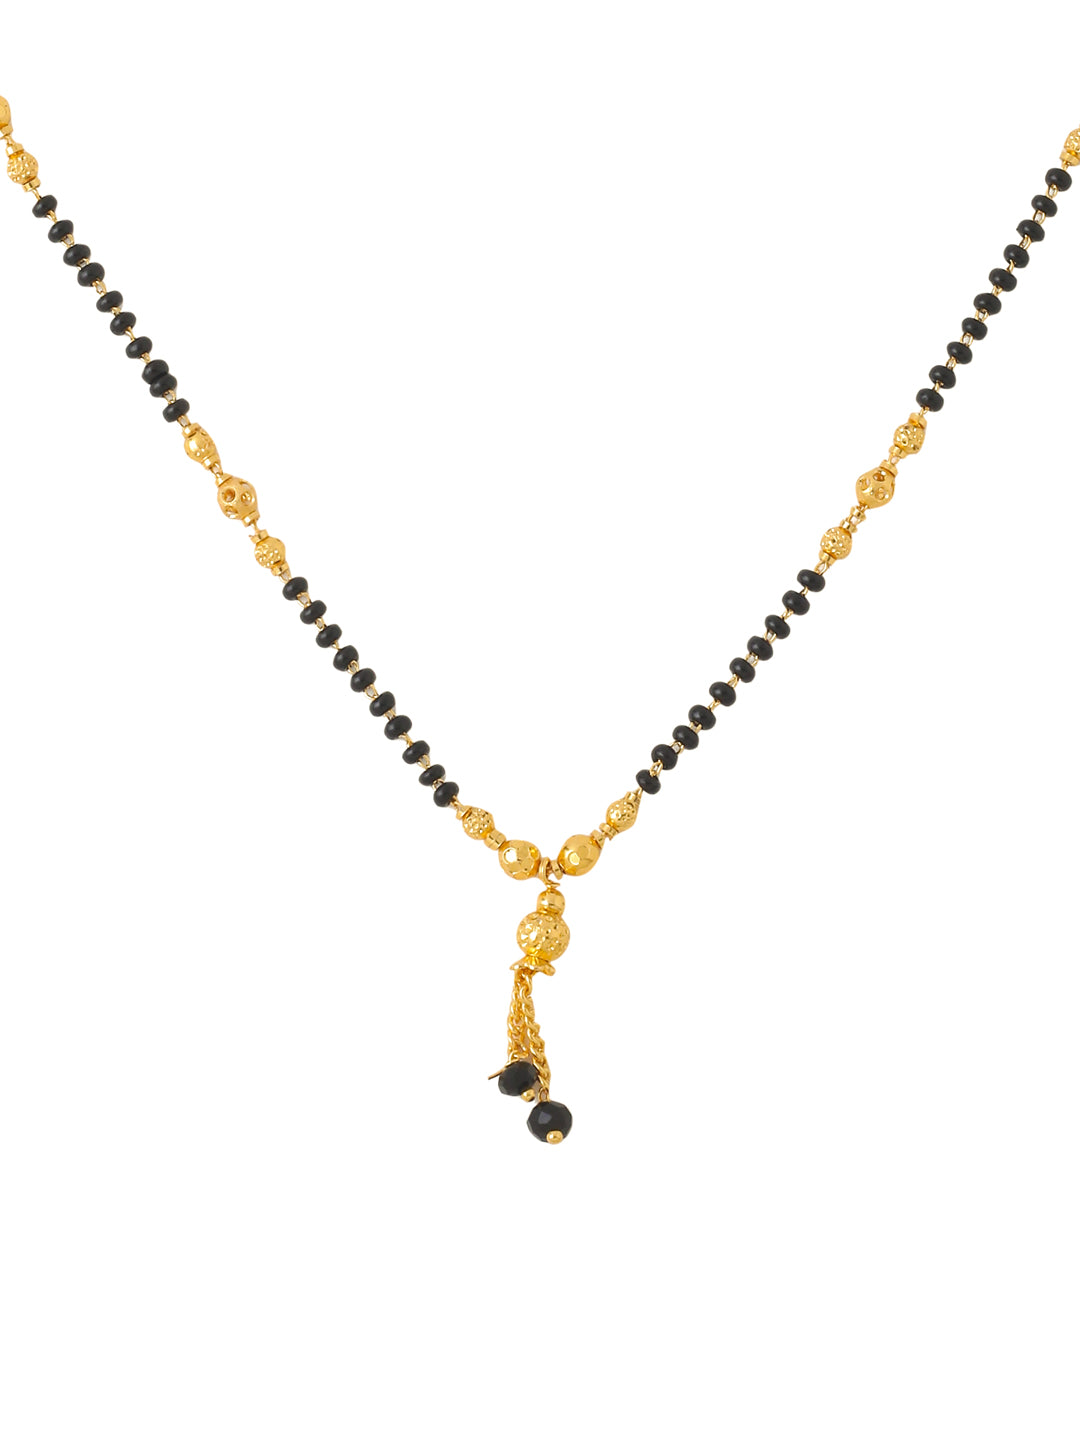 Women's Ethnic Gold-Plated Beaded Mangalsutra - NVR